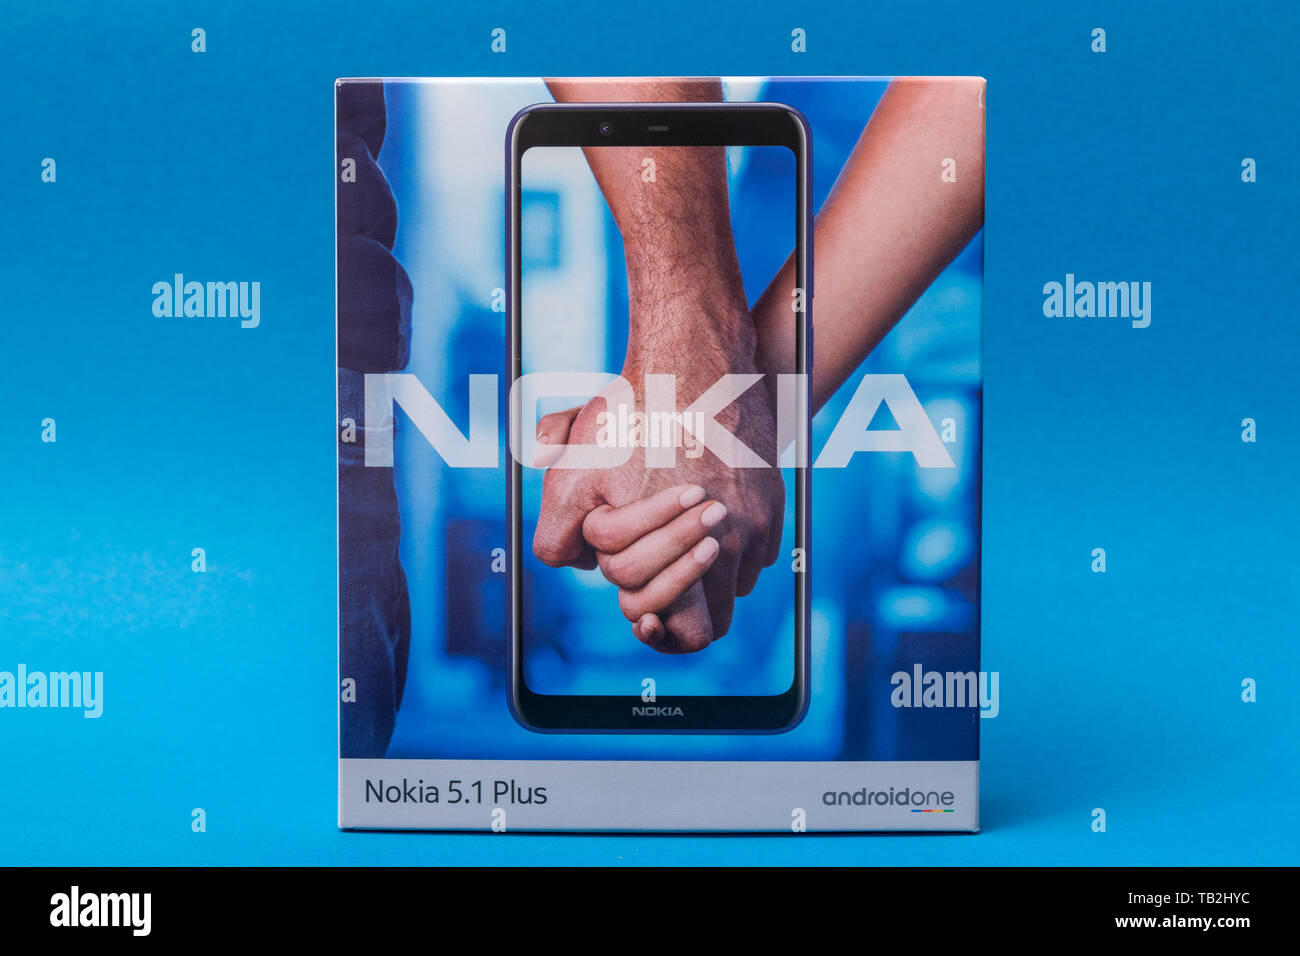 Cluj, Romania - May 13, 2019: Nokia smartphone made by Nokia Corporation, a Finnish multinational telecommunications, information technology, and cons Stock Photo